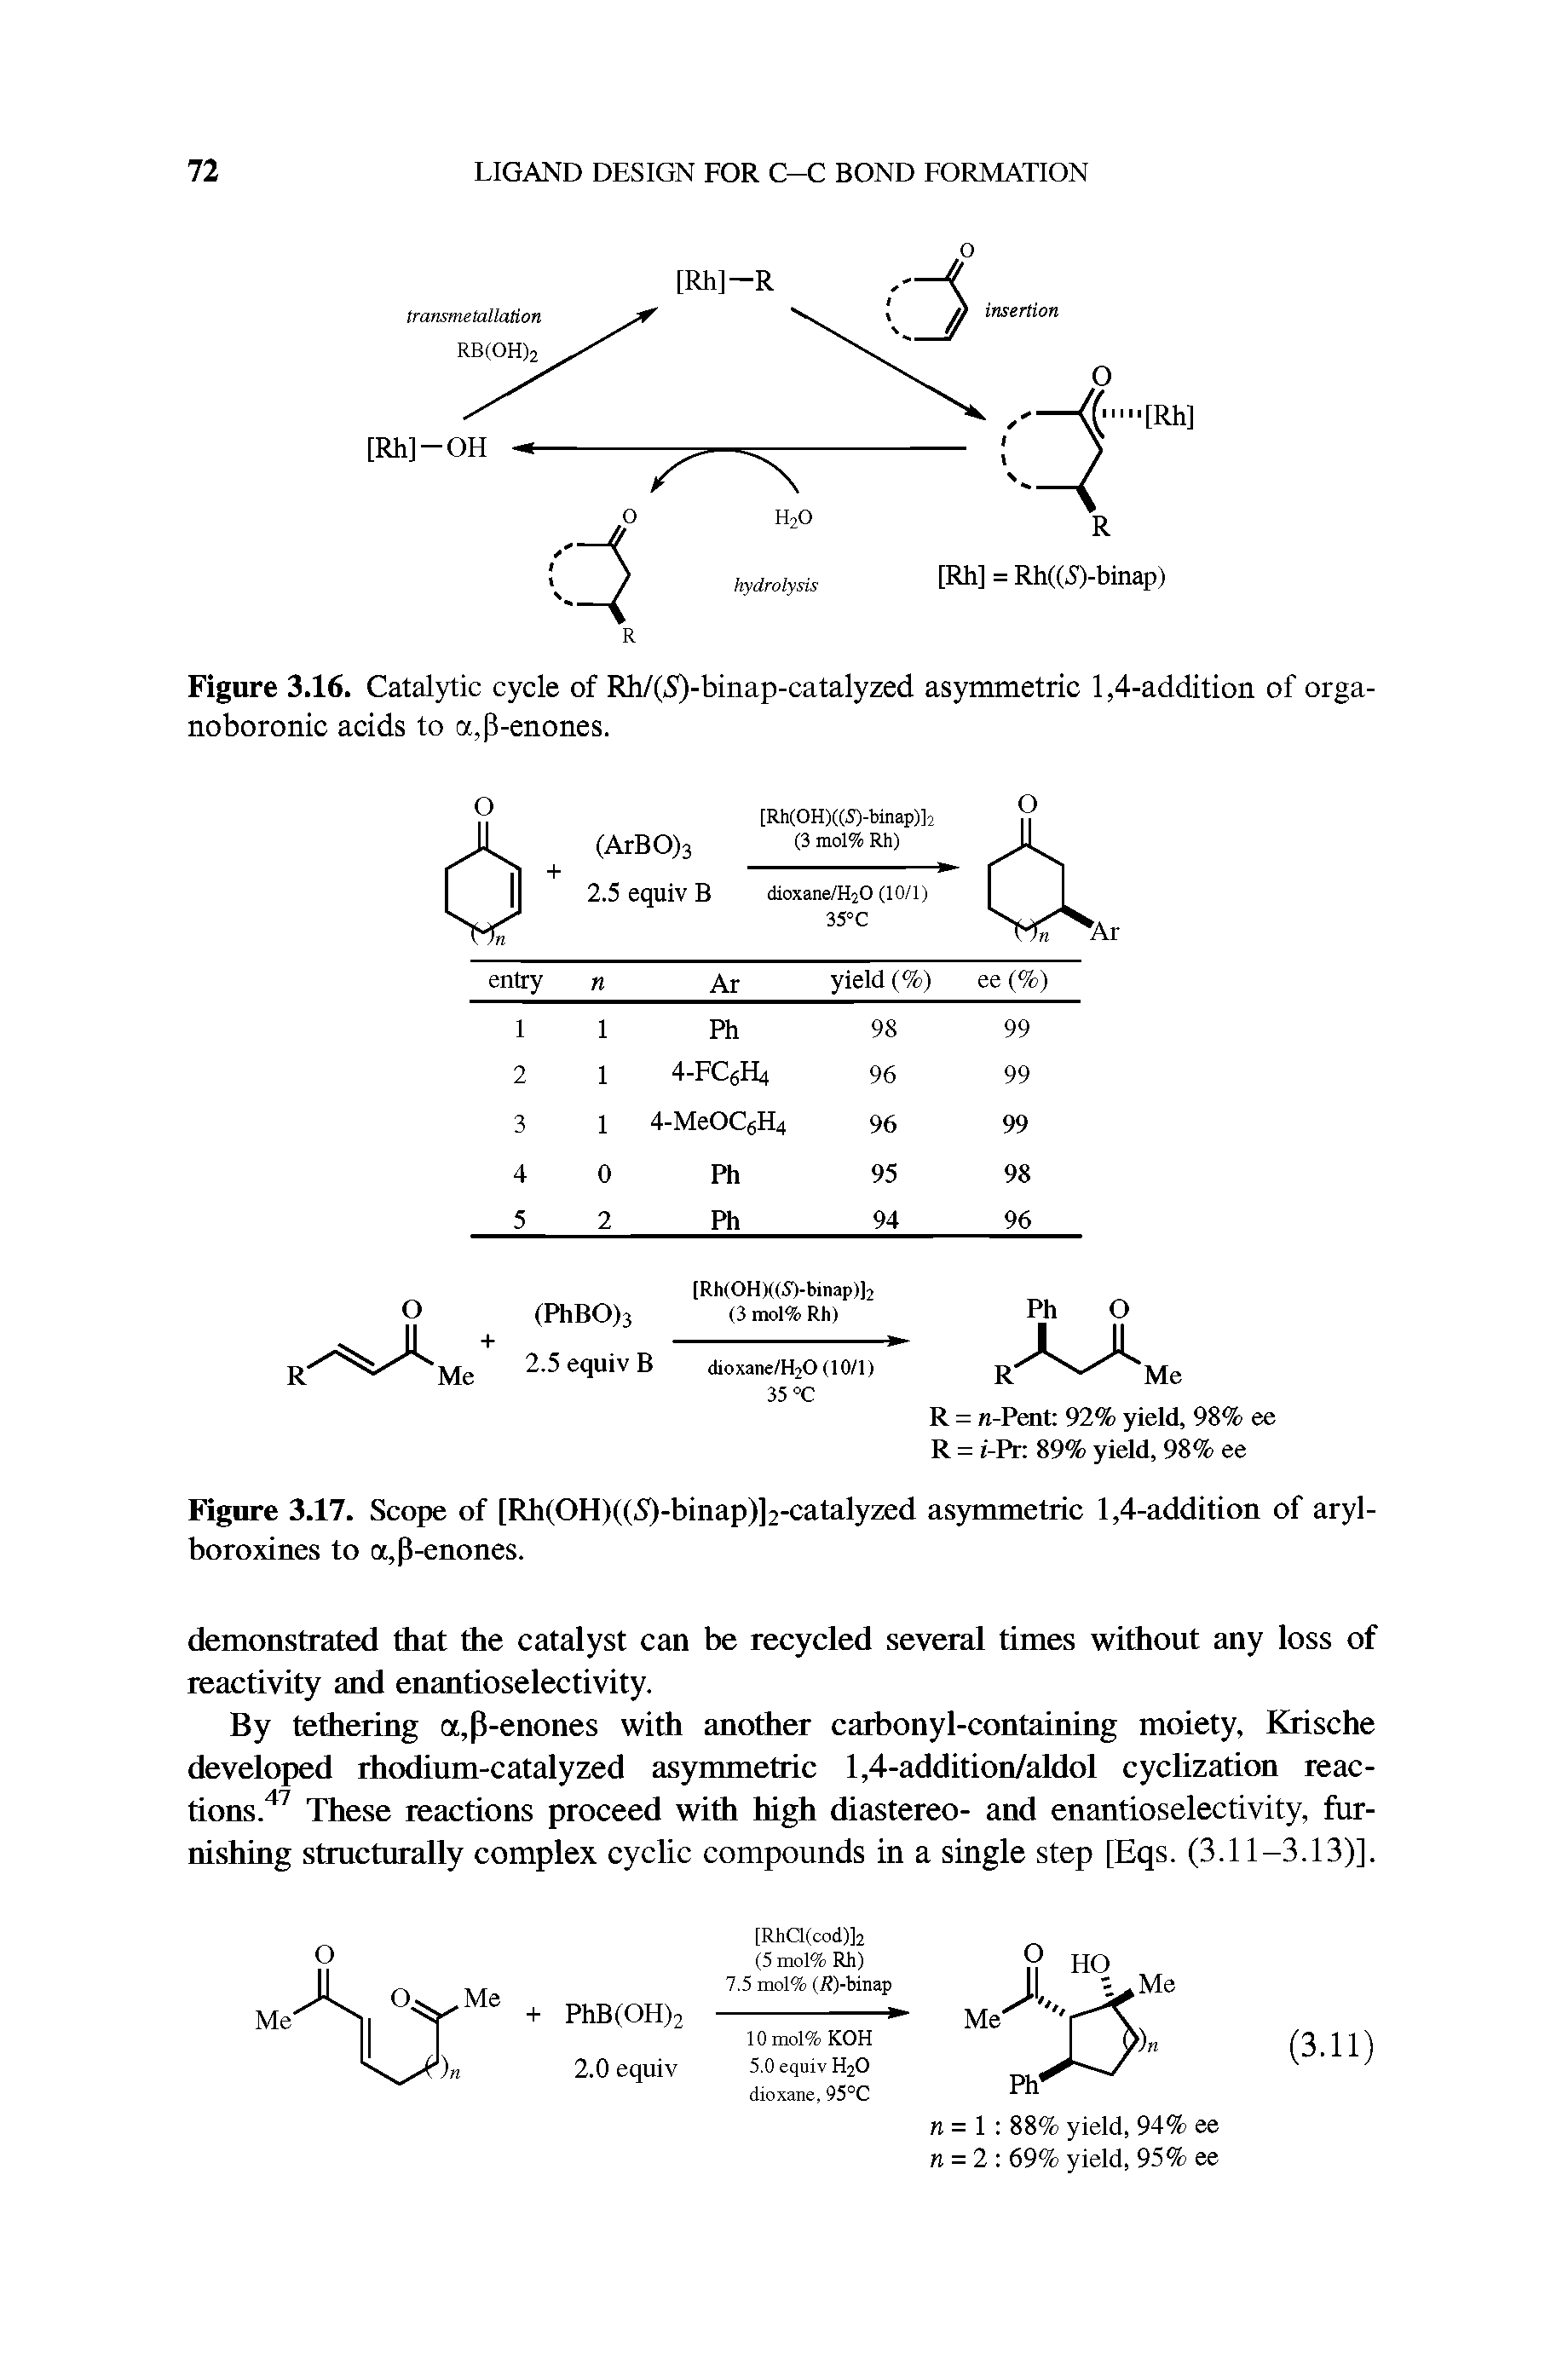 Figure 3.17. Scope of [Rh(OH)((5)-binap)]2-catalyzed as5dnmetric 1,4-addition of aryl-boroxines to a,P-enones.